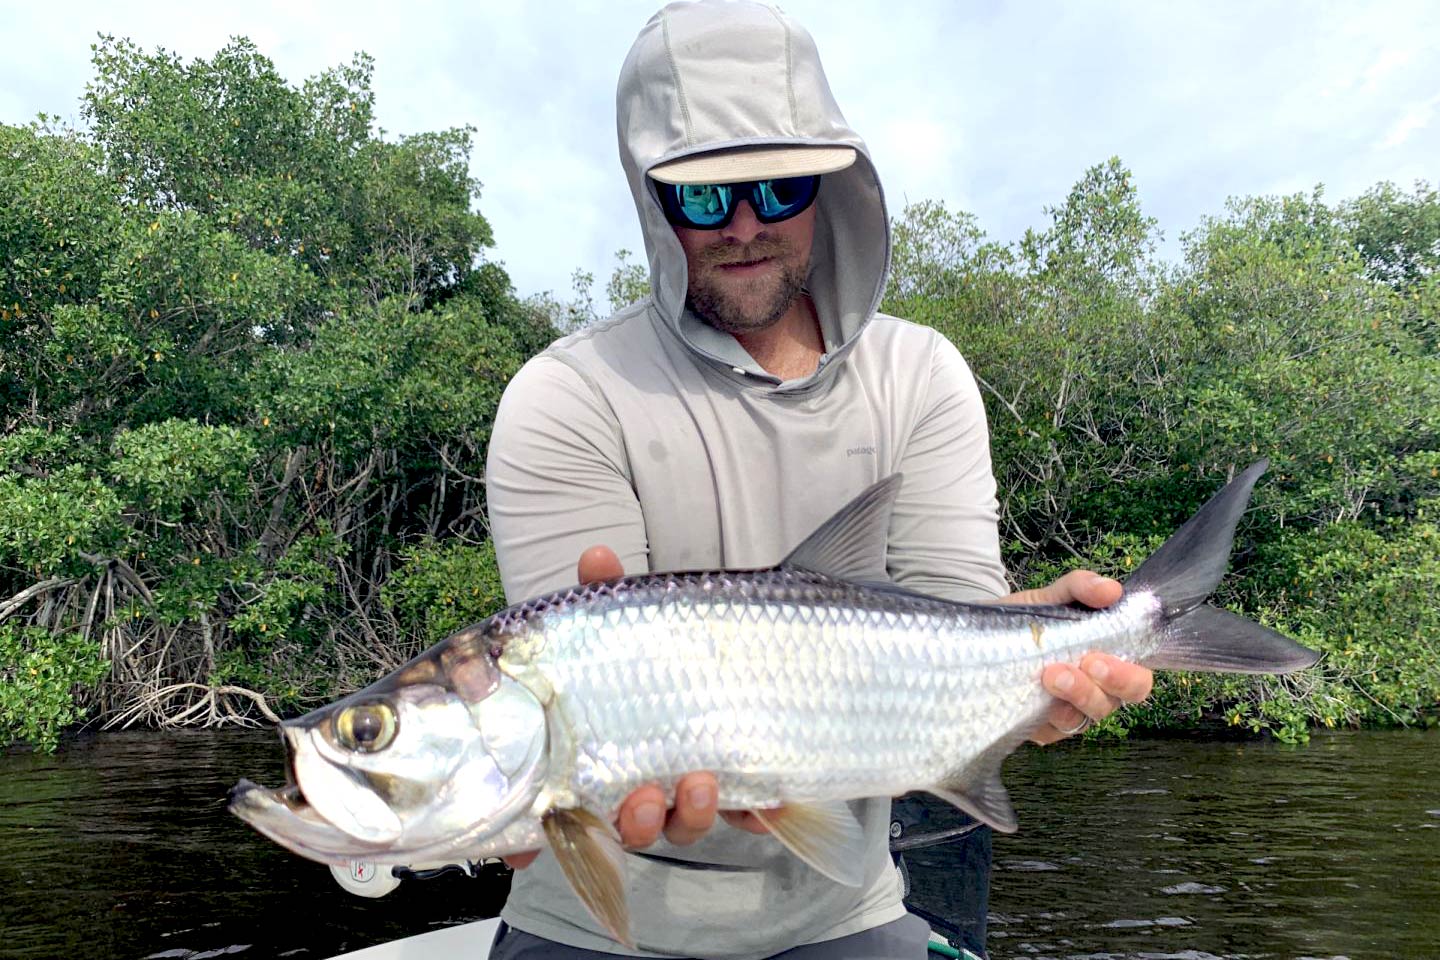 A hooded angler holing a Tarpon on a boat with trees in the background